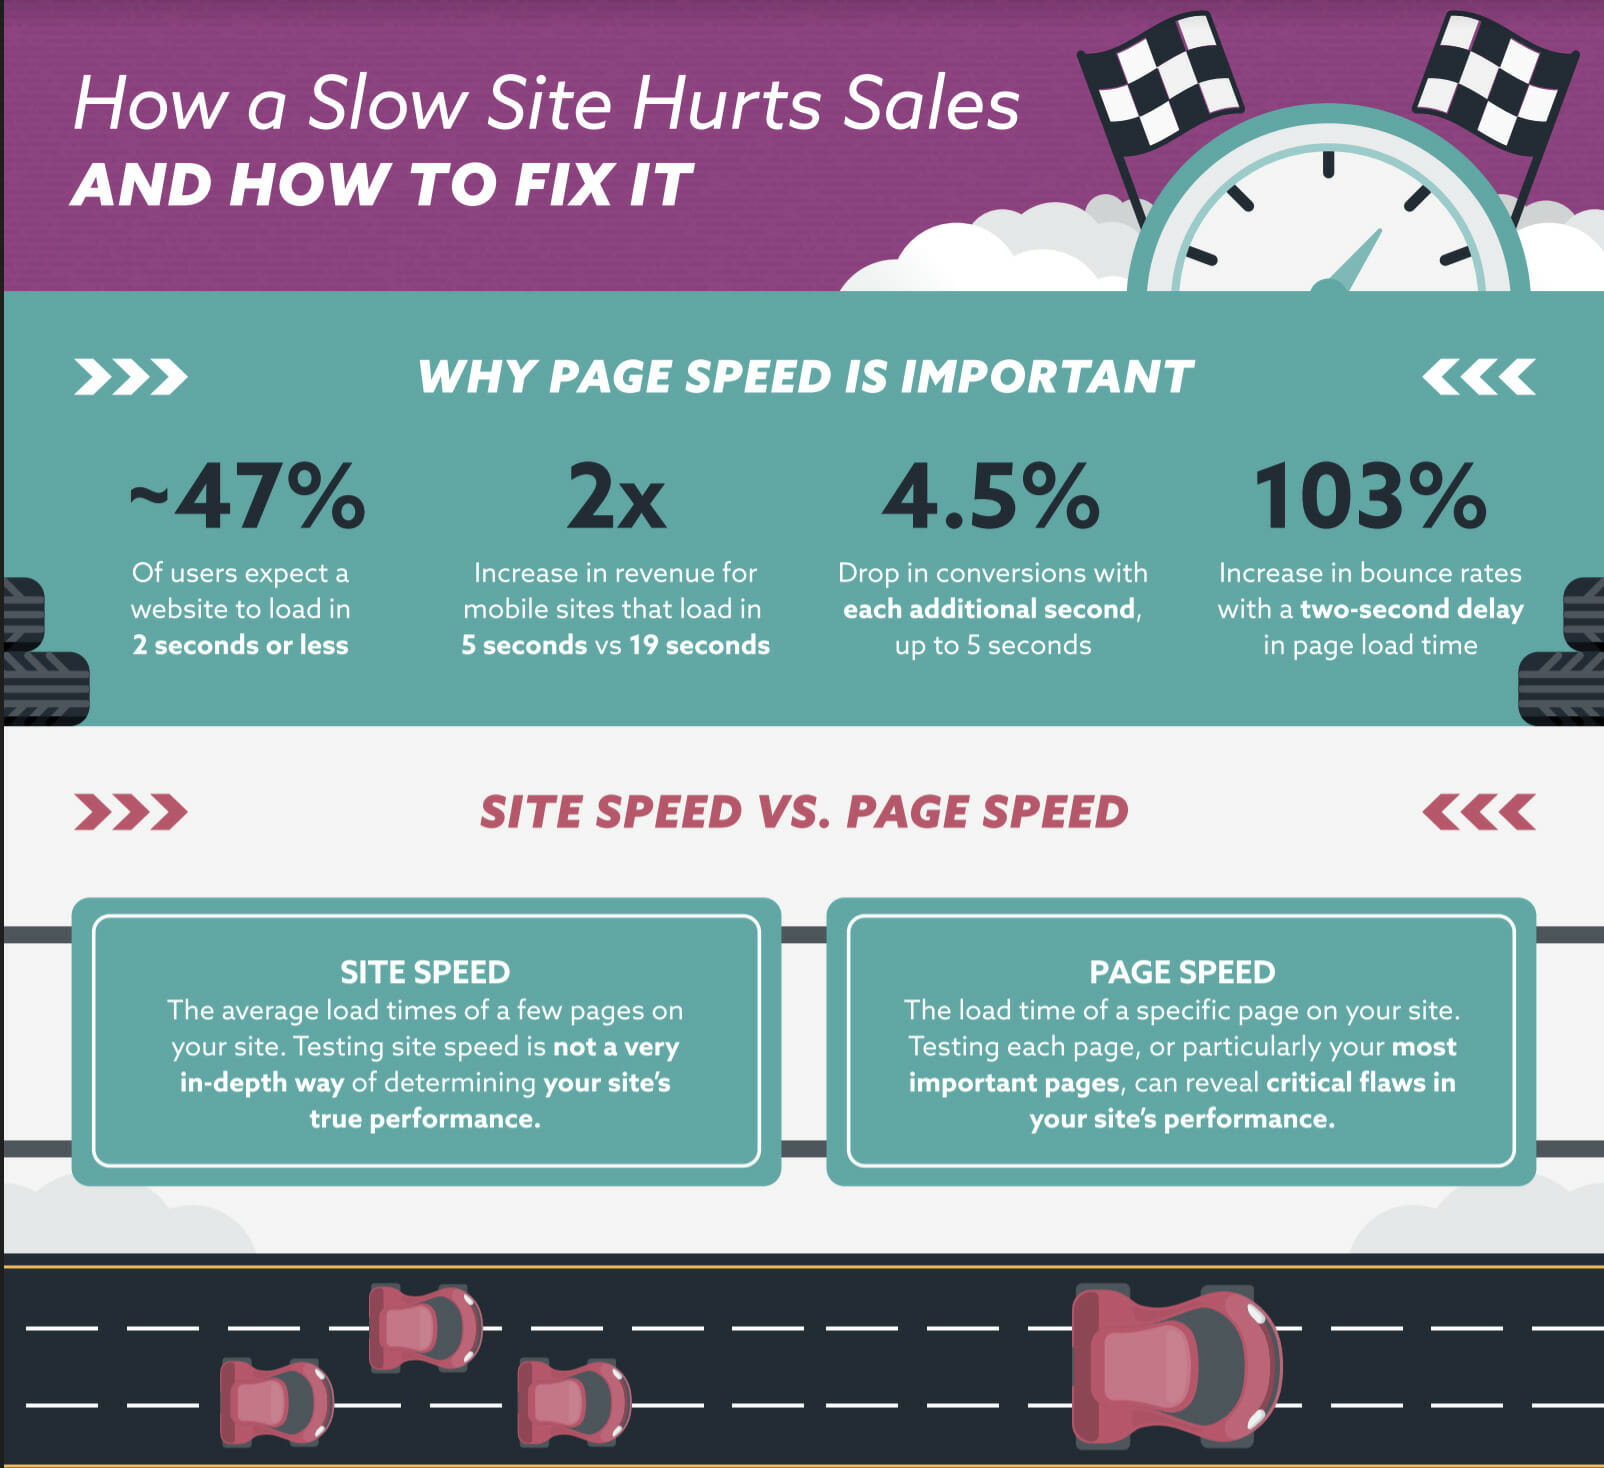 How a slow site hurts sales.